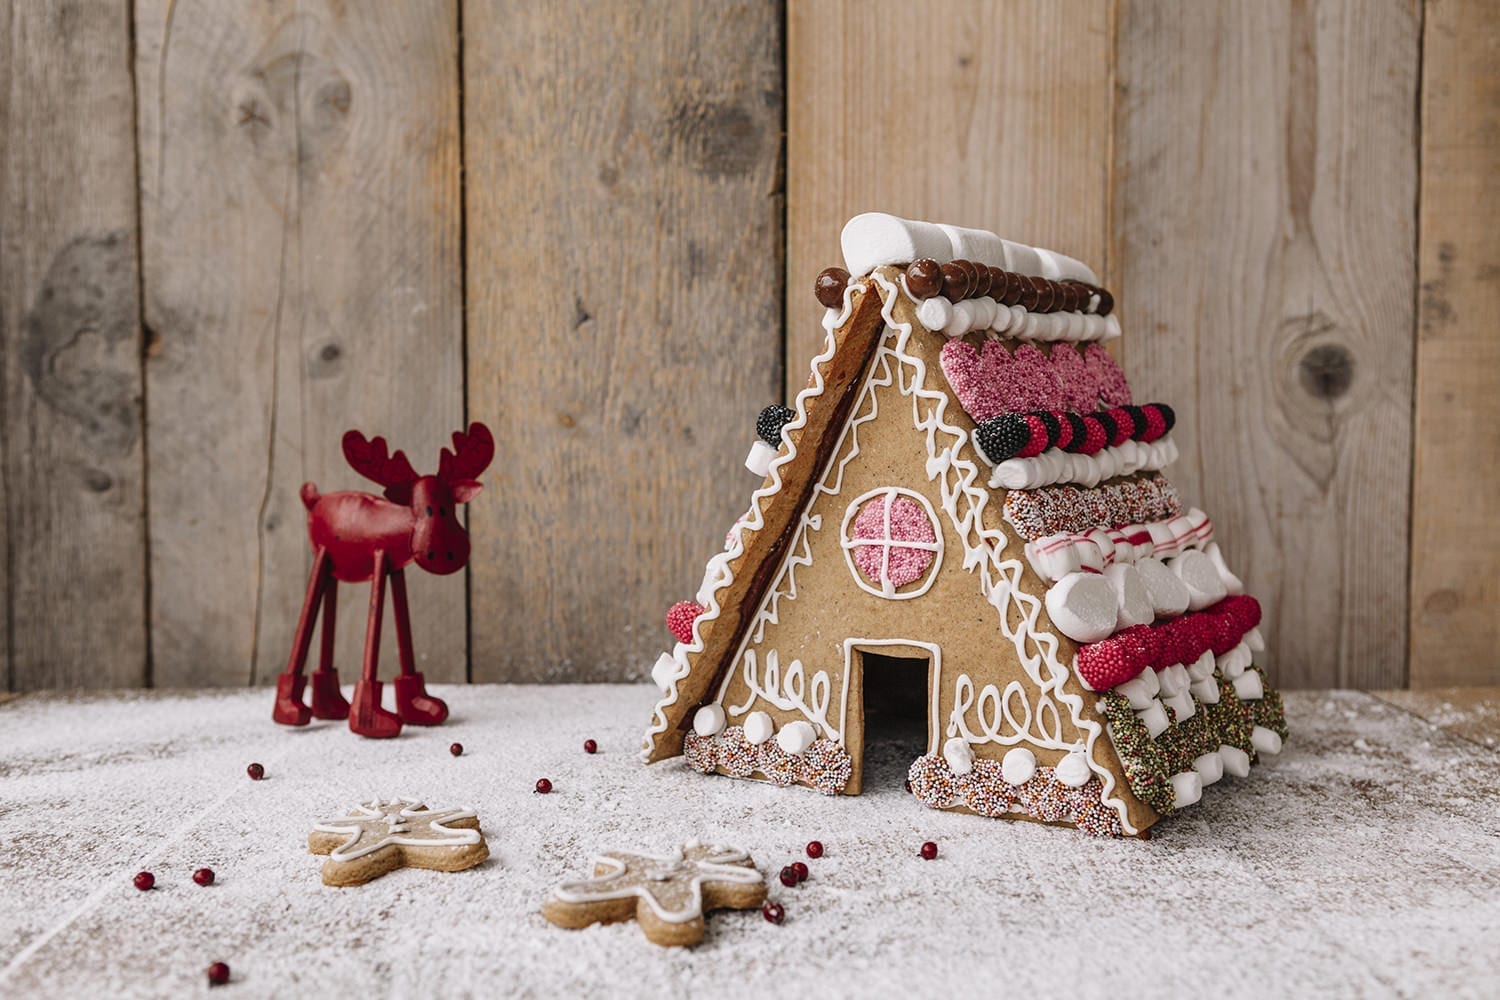 homemade scandinavian gingerbread house with lots of sweets on a snowy surface and with gingerbread men